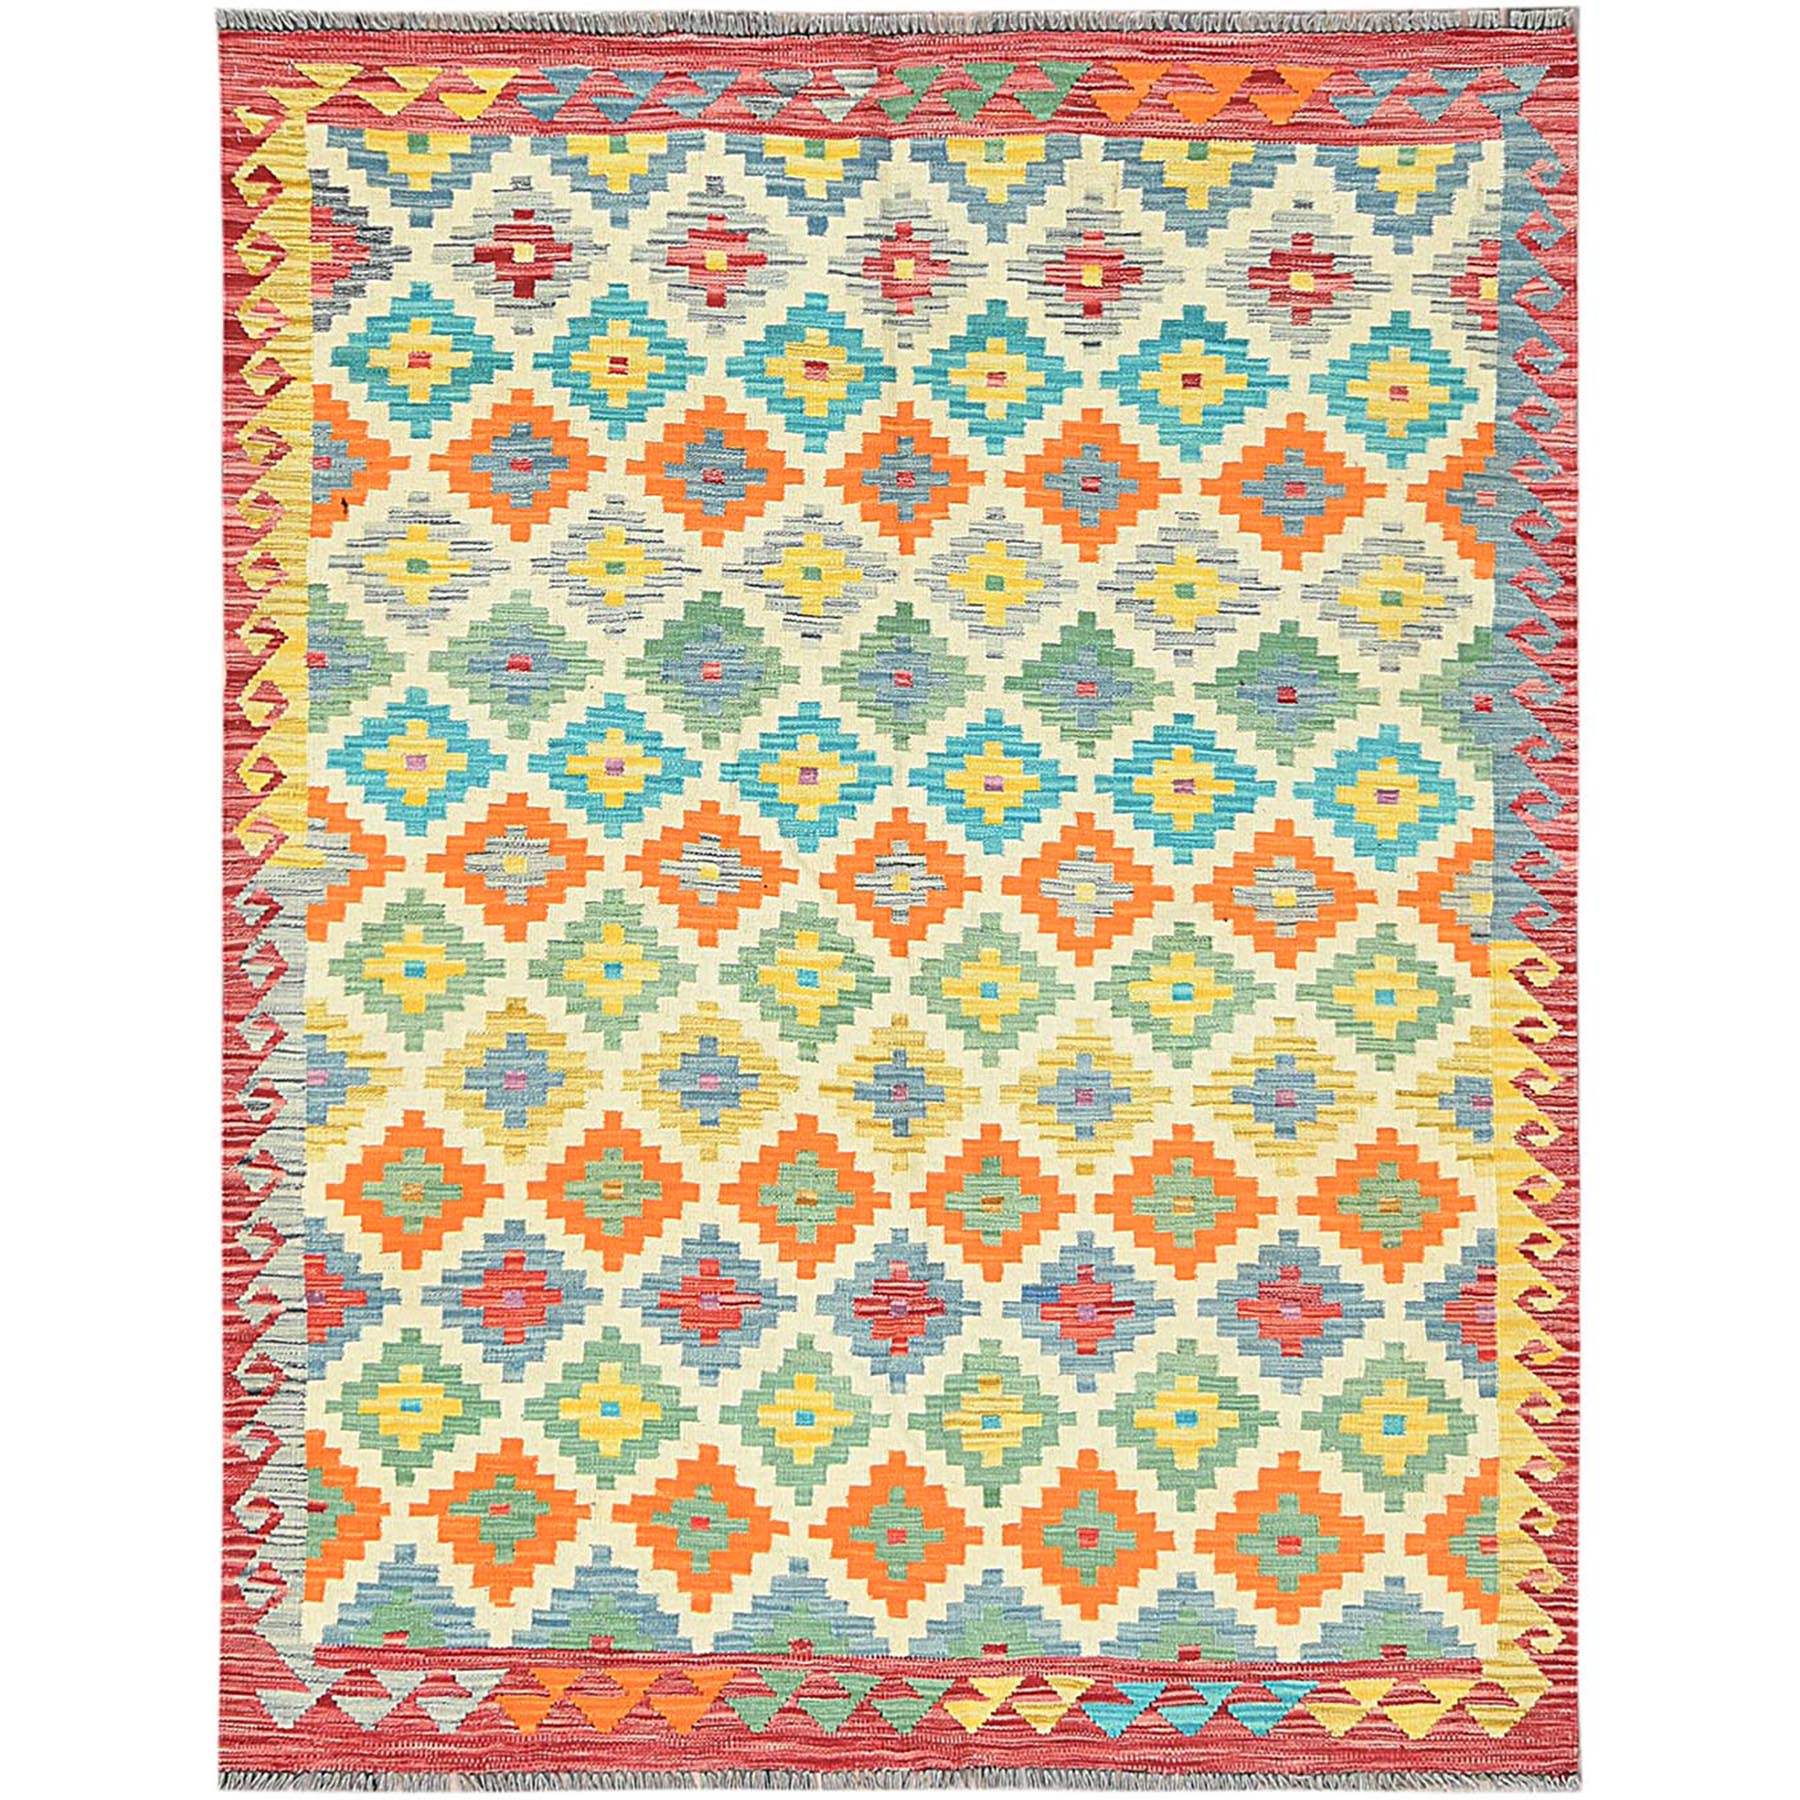 traditional Wool Hand-Woven Area Rug 5'1